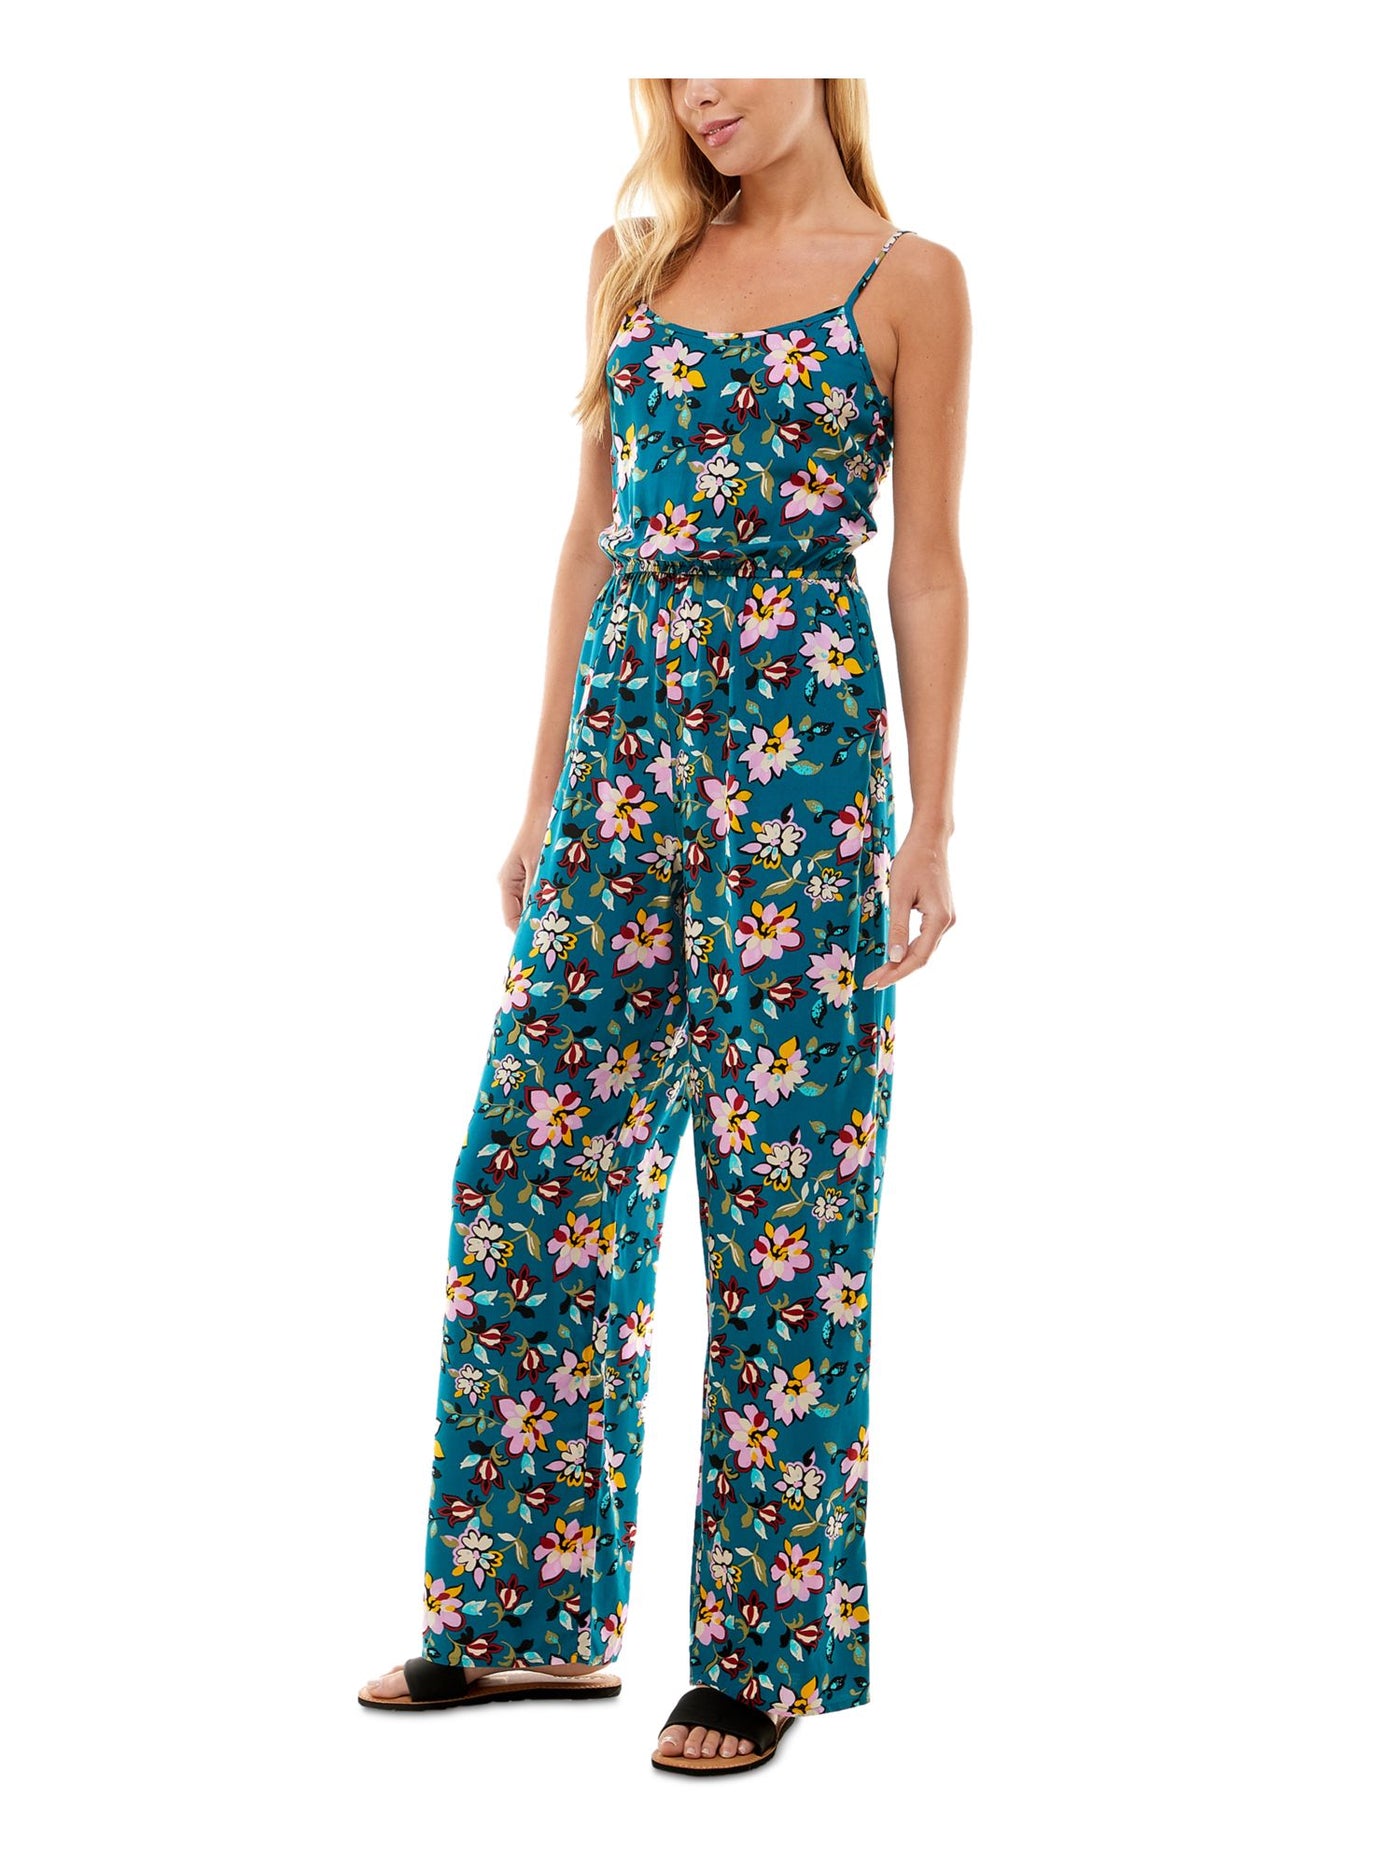 KINGSTON GREY Womens Teal Pocketed Open Back Tie Back Elastic Waist Floral Spaghetti Strap Scoop Neck Wide Leg Jumpsuit Juniors S